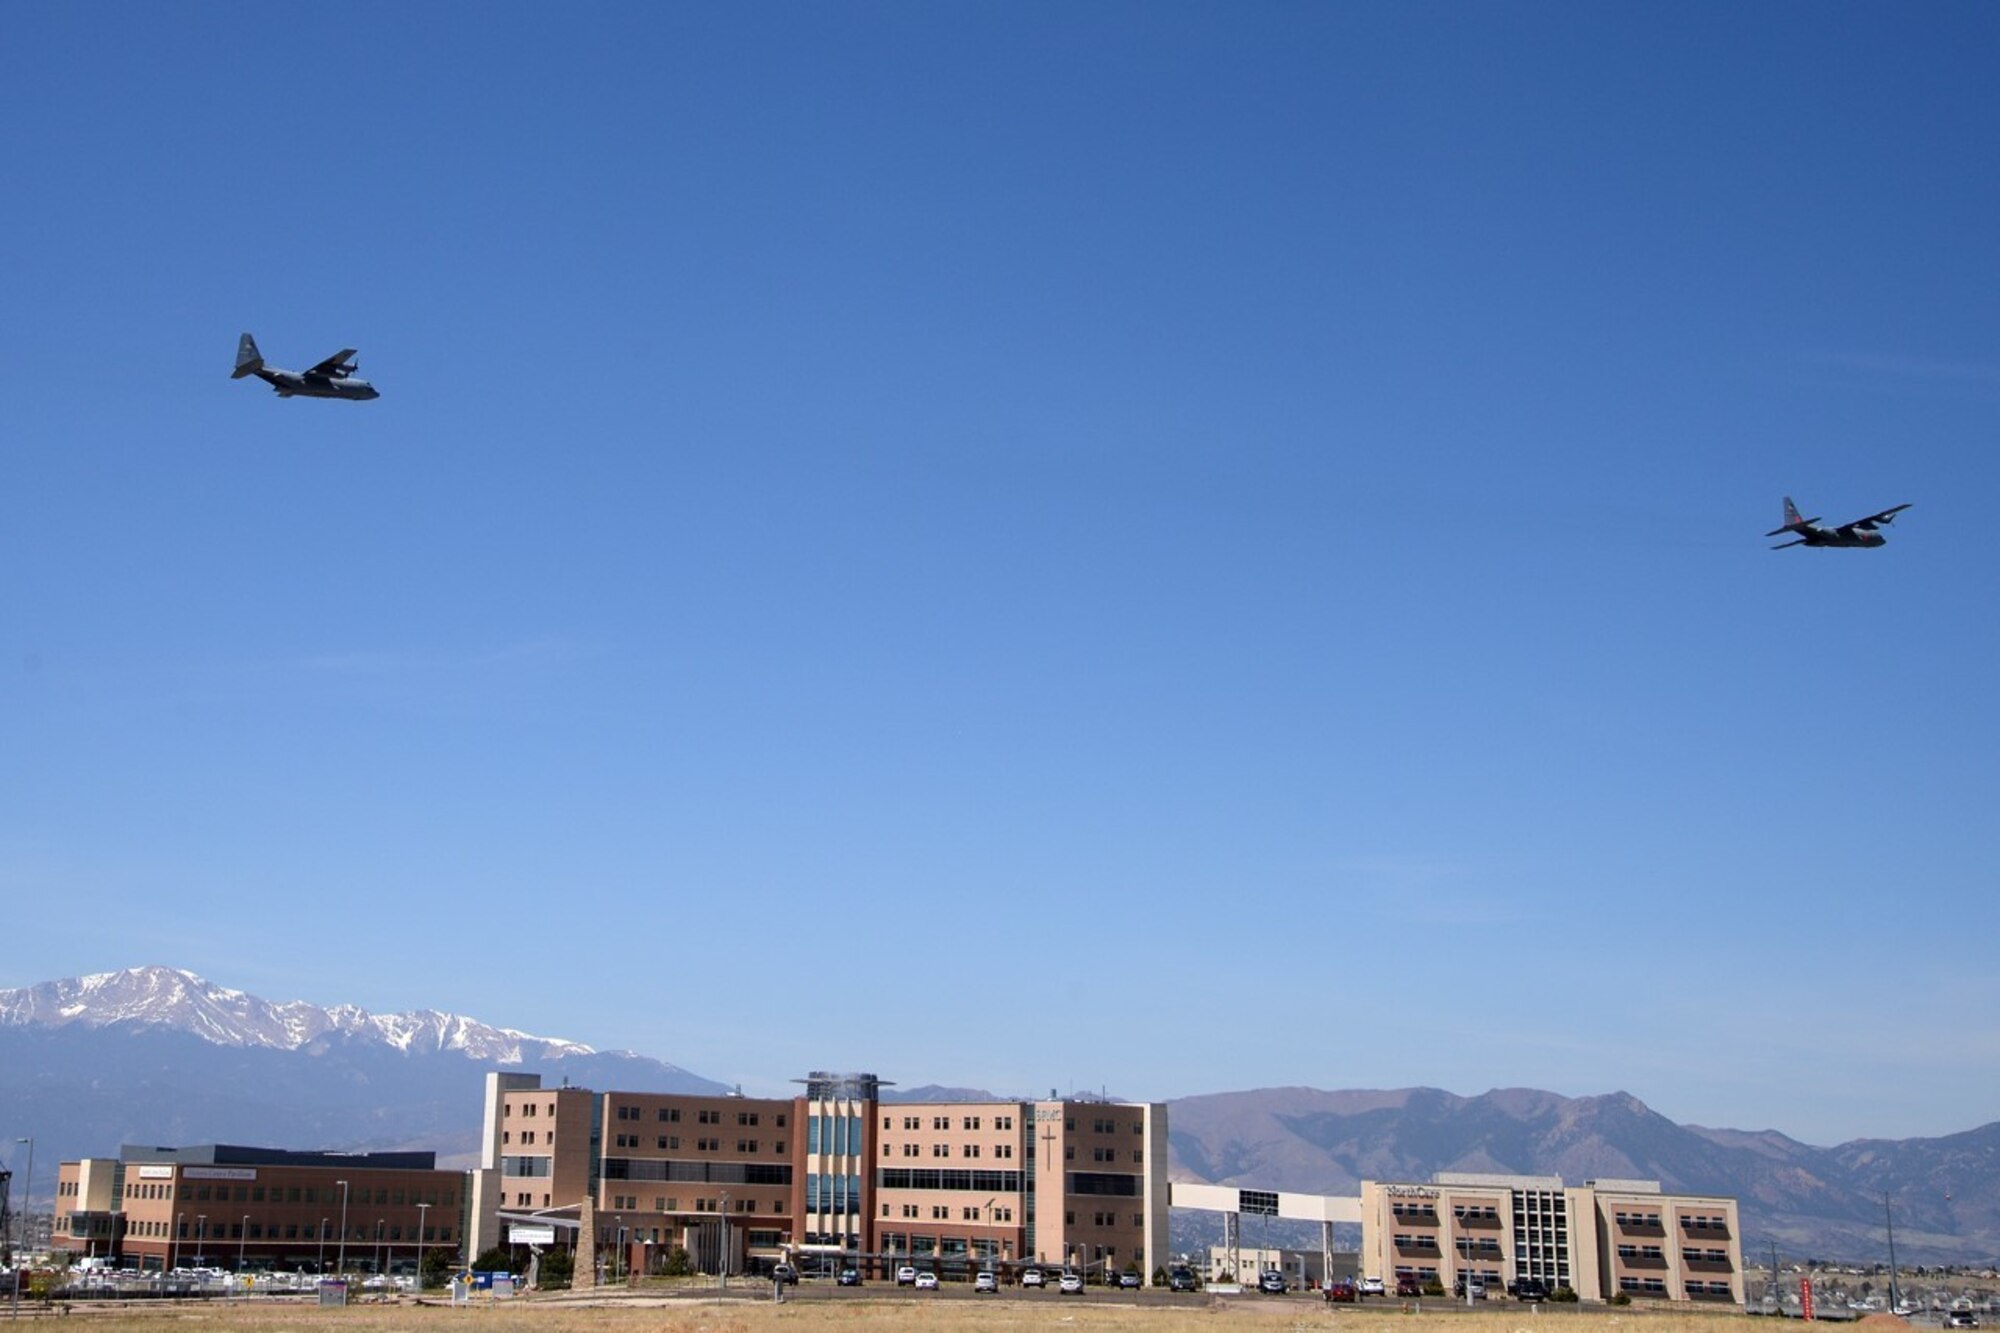 Image shows two large aircraft flying over Colorado Springs hospital